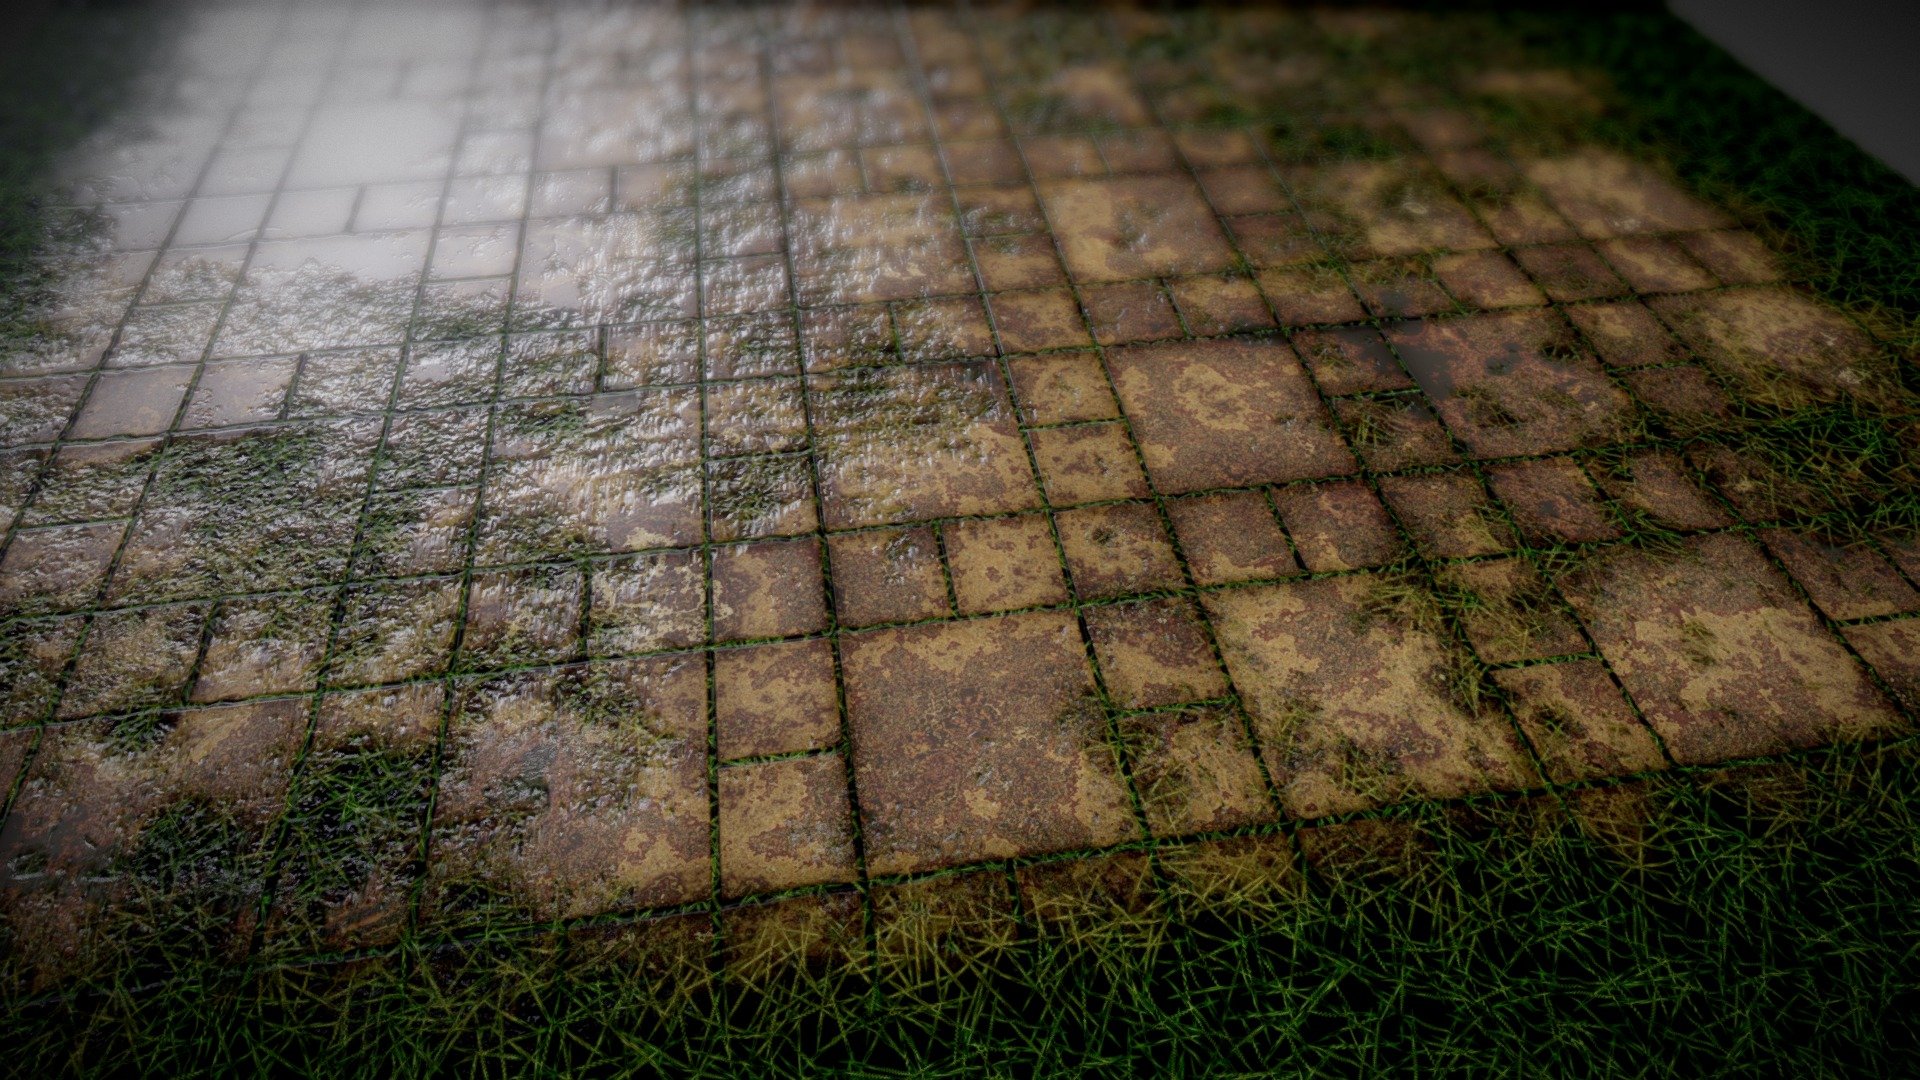 Substance Designer - Stone tiles with grass